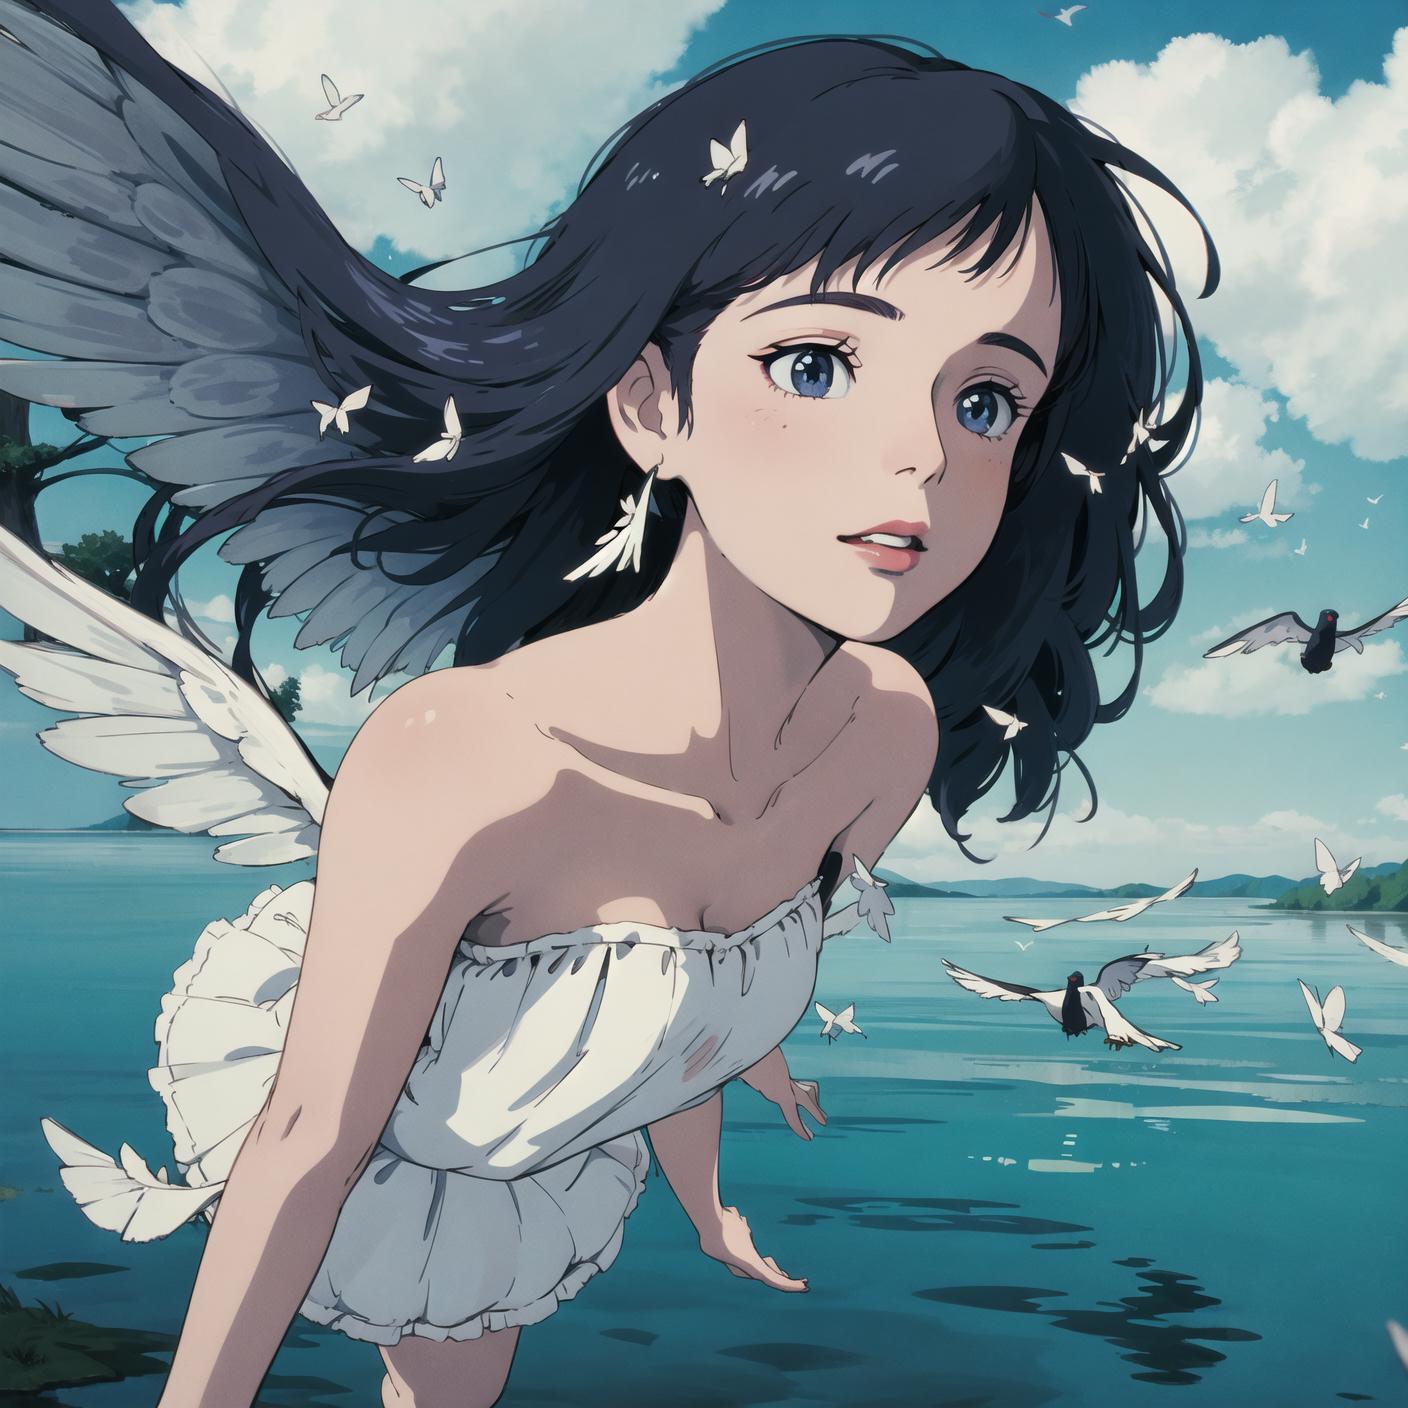 An anime girl with wings is depicted in a serene scene where she is surrounded by numerous birds flying around her. The girl appears to be walking through the water as she interacts with the birds. The scene captures a sense of peace and harmony between the girl and the feathered creatures.